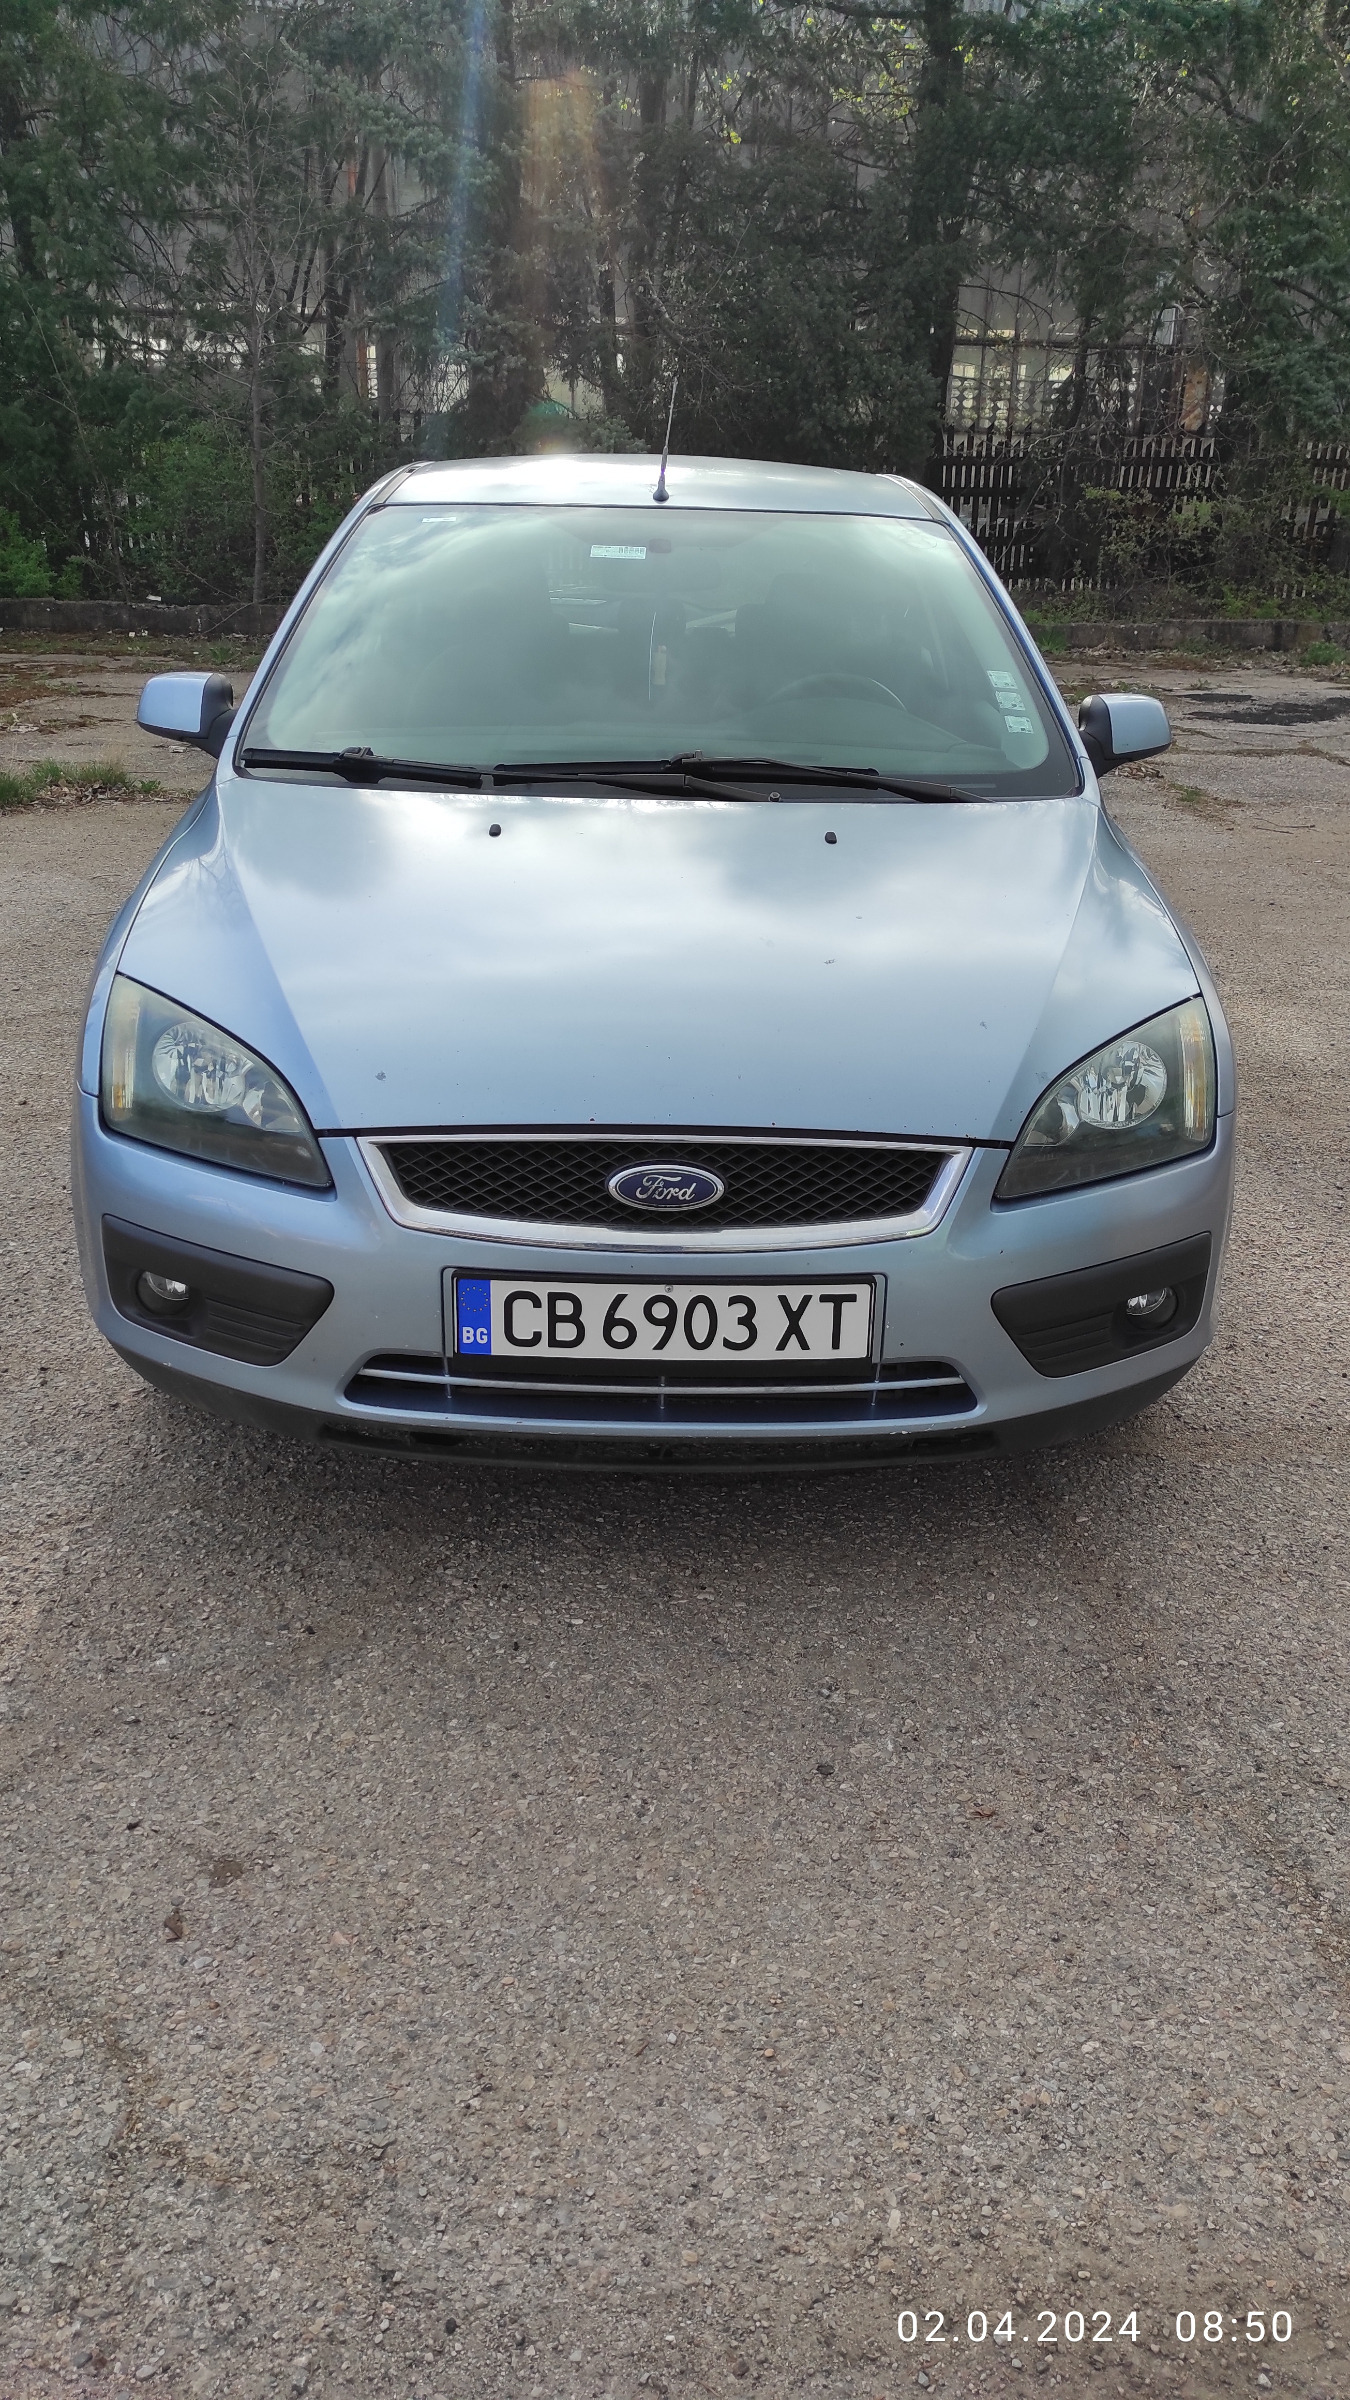 Ford Focus 1.6HDI-90ps - [1] 